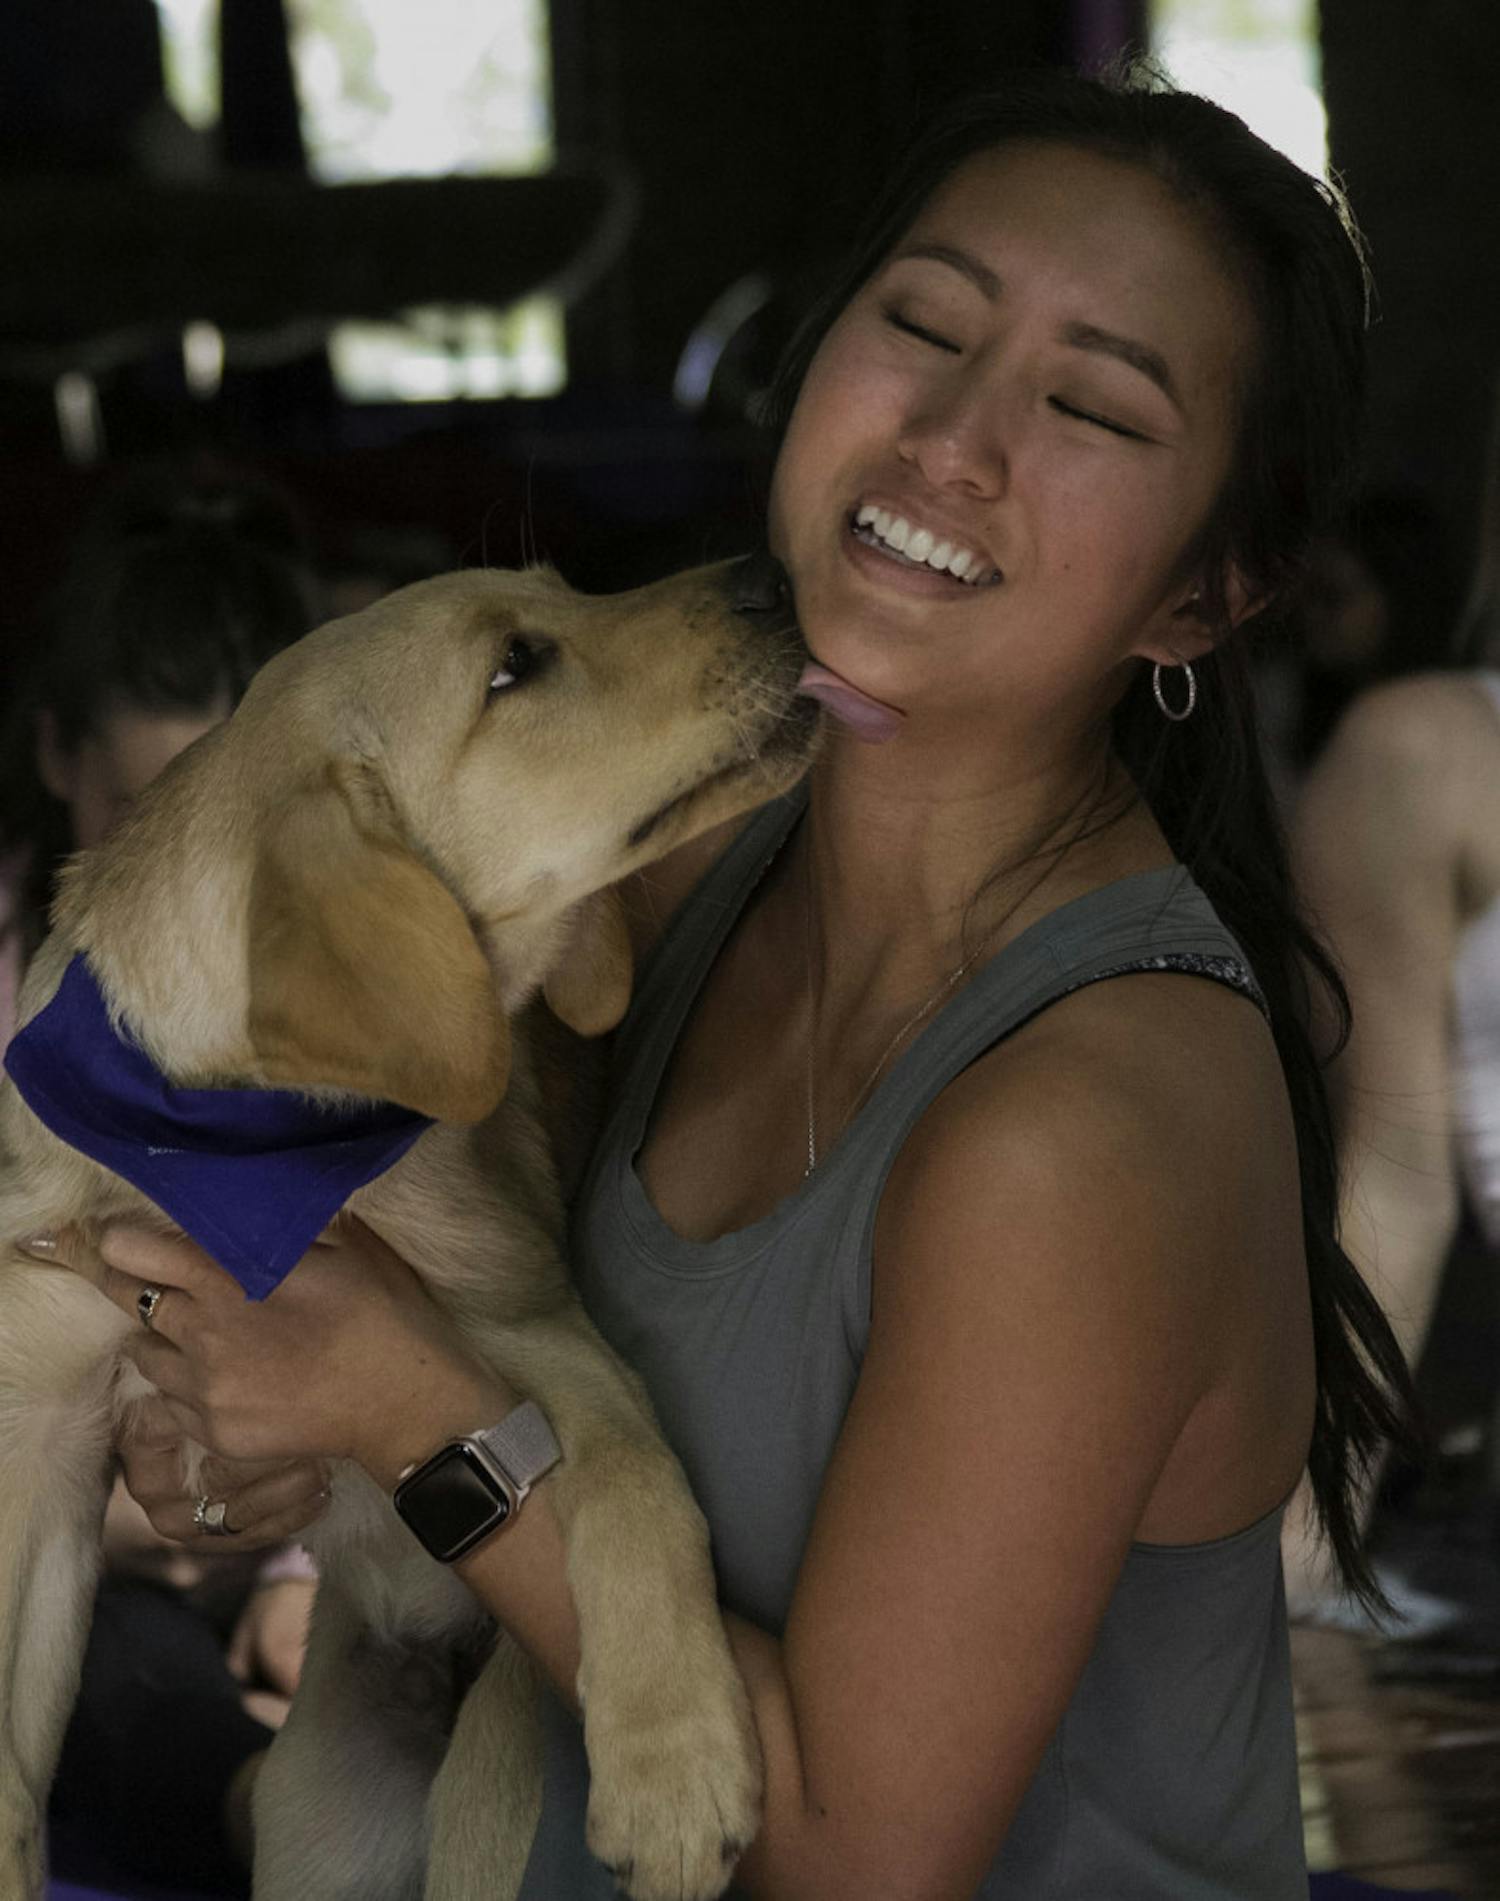 On Sunday afternoon, January 26, 2020, in collaboration with the UF Puppy Club, a student organization that supports Southeastern guide dogs, the yoga center Flow Space held a Puppy Yoga class.